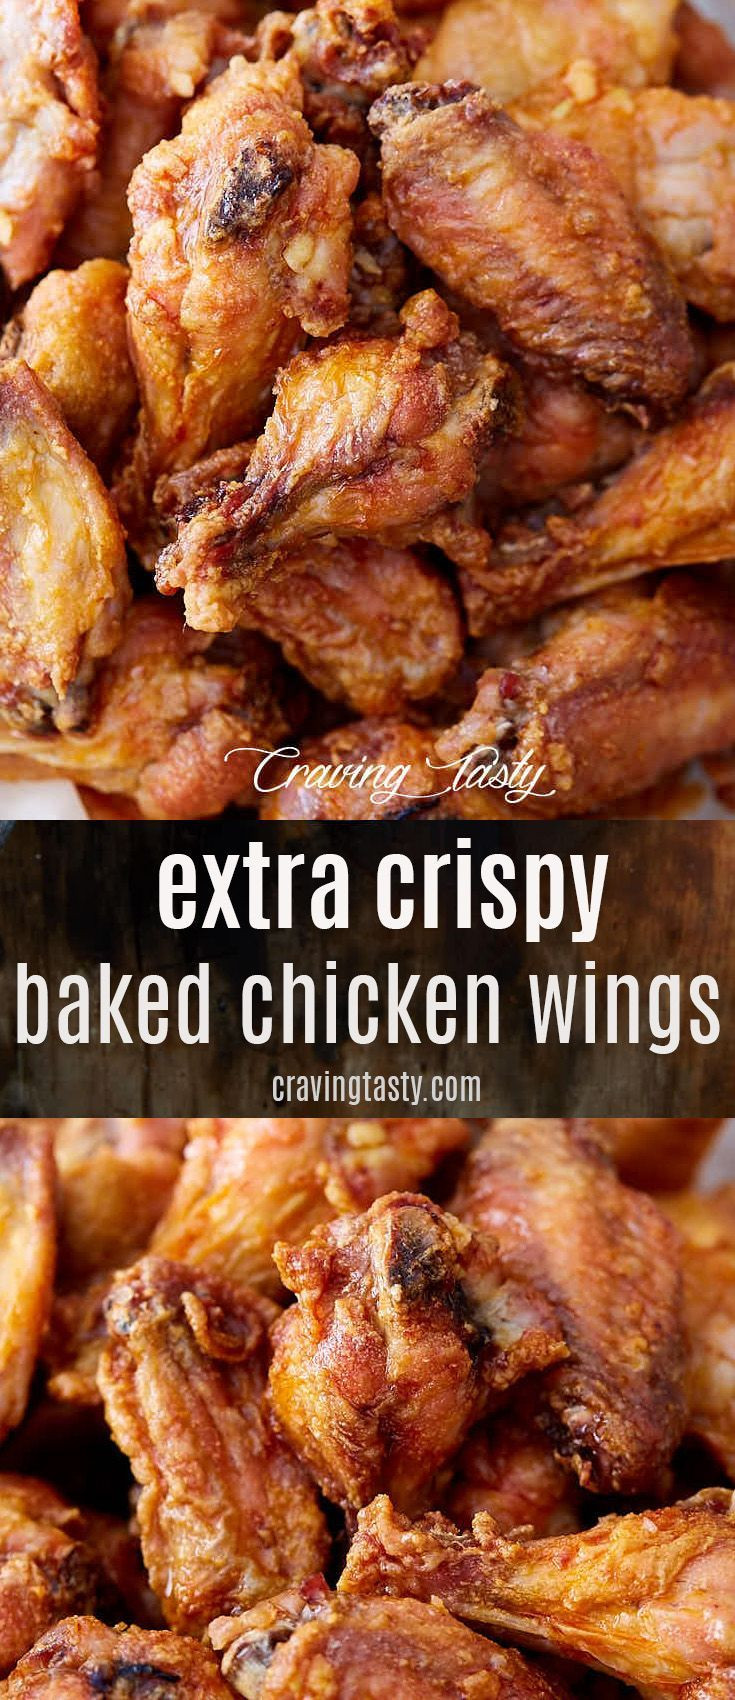 Crispy Baked Chicken Wings Baking Powder Elegant Super Crispy Baked Chicken Wings the Secret is to Use